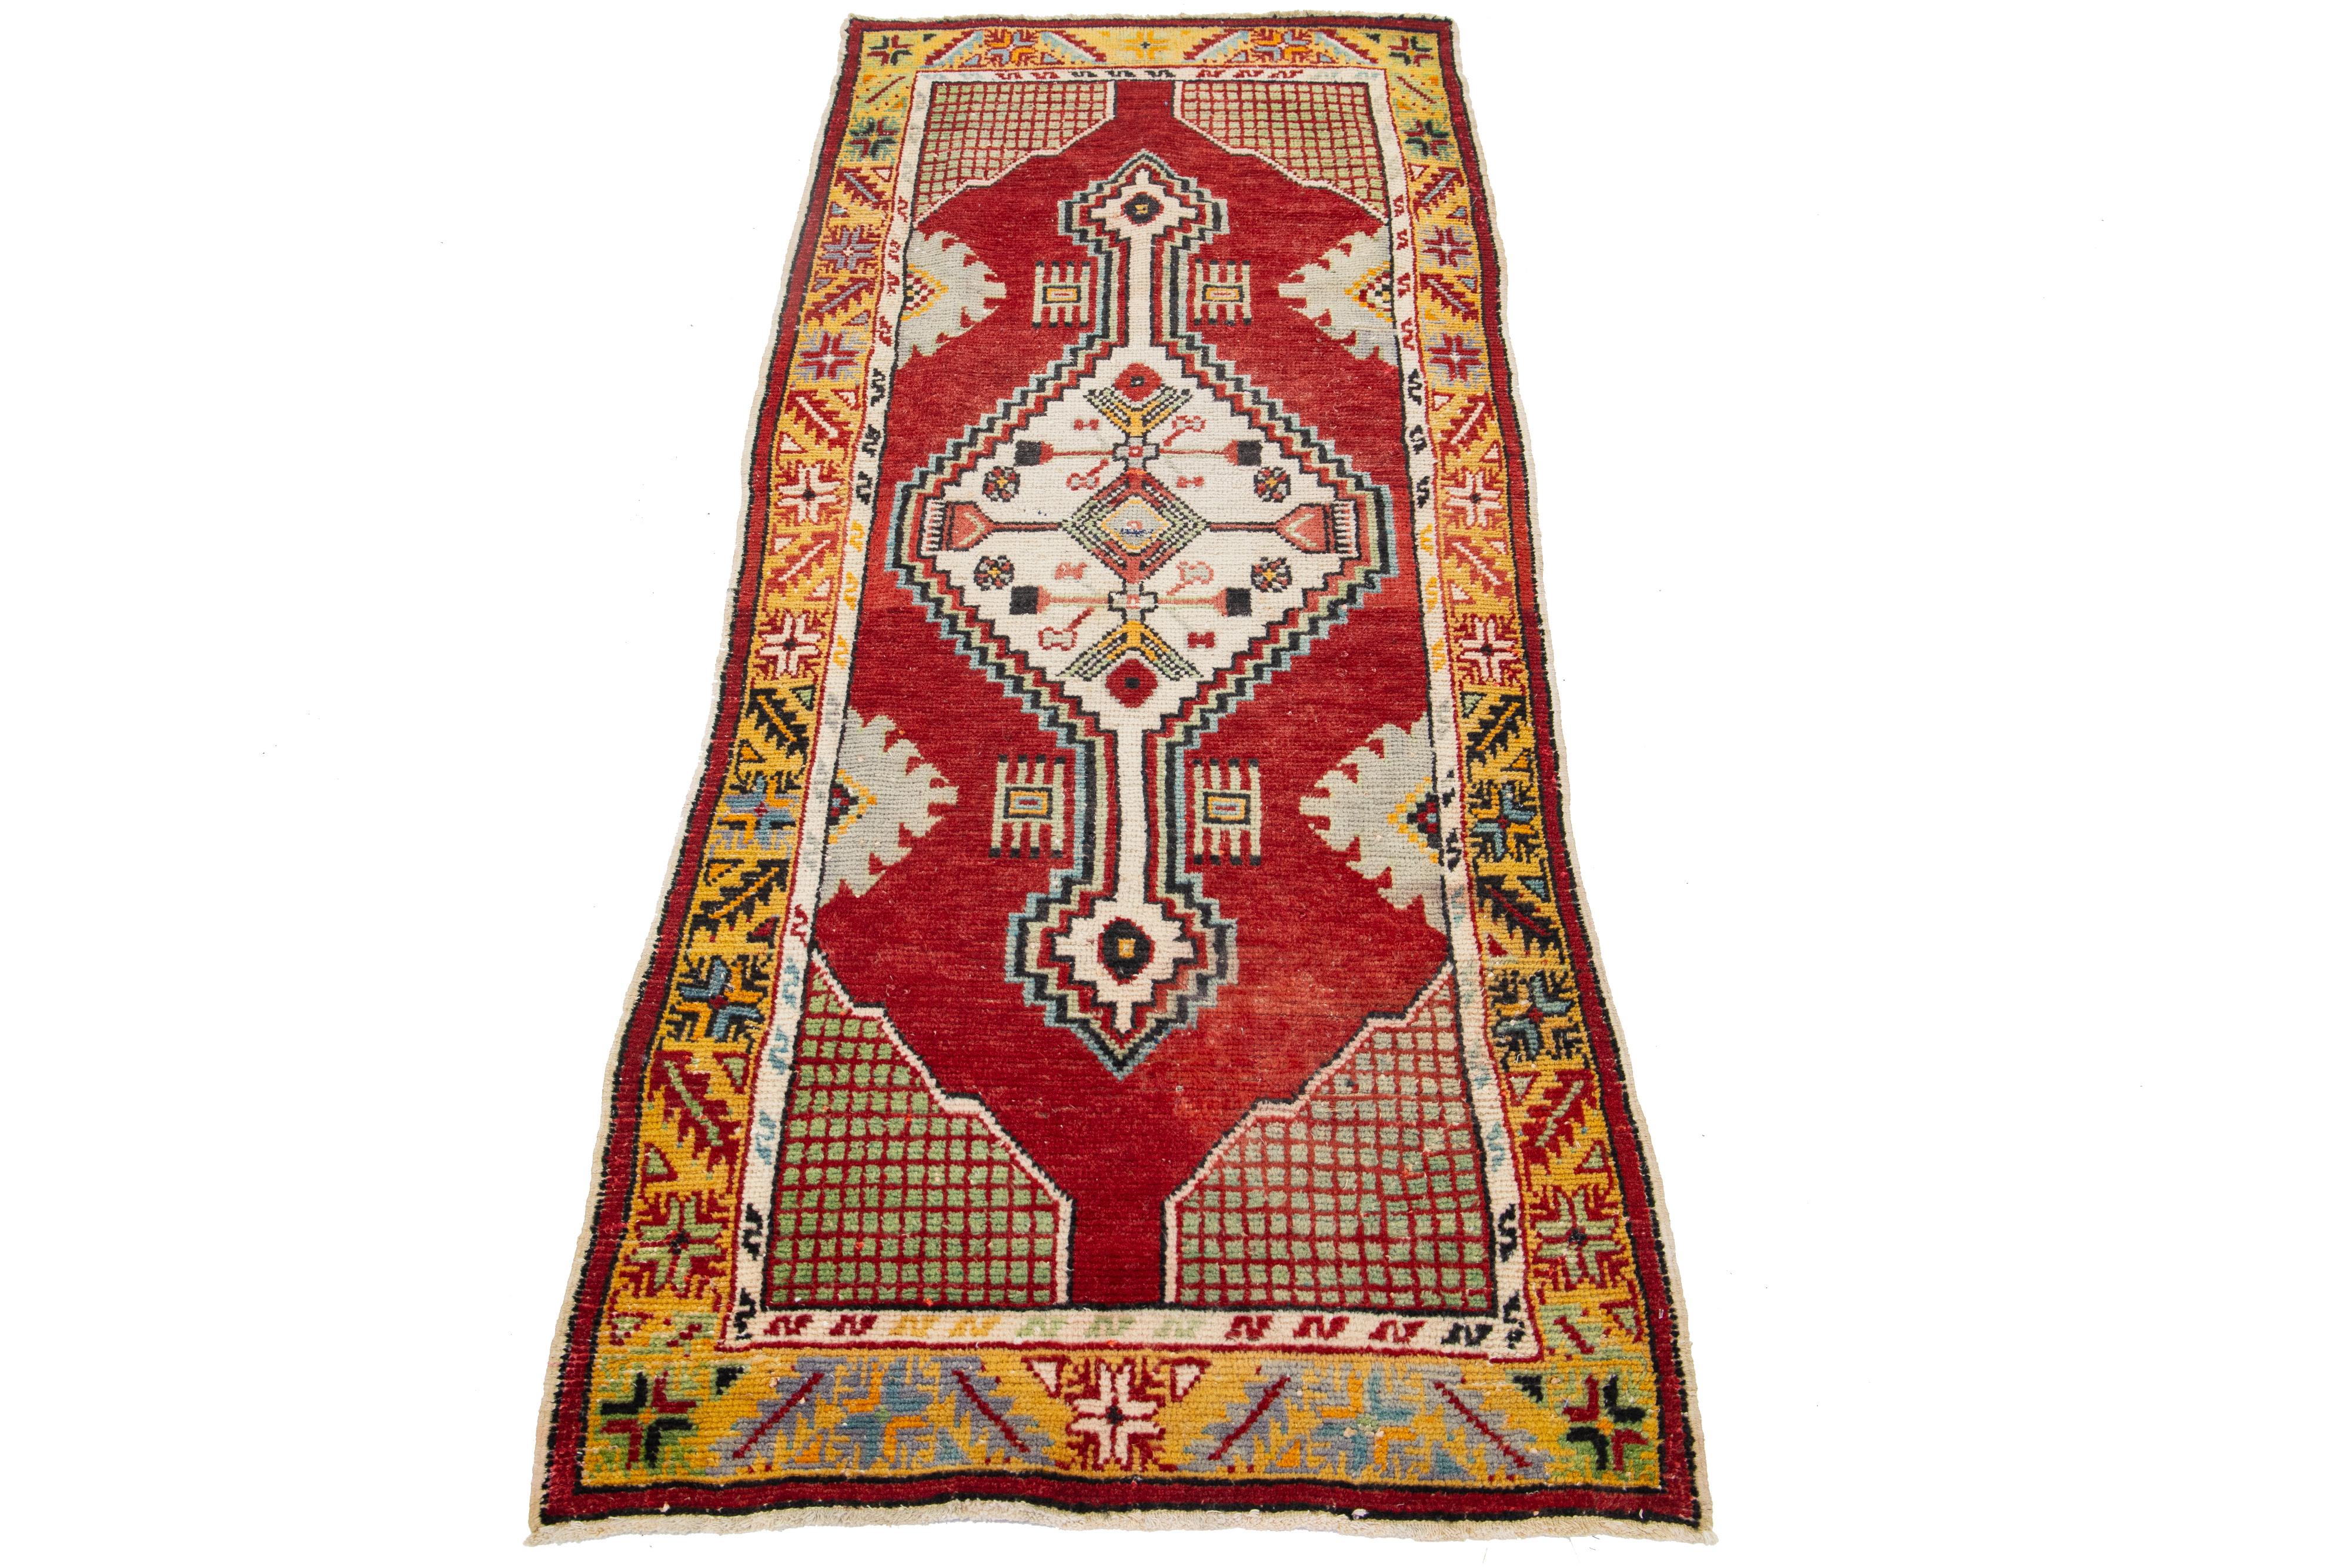 A hand-knotted vintage Anatolian rug features a geometric design on a red field, with ivory, green, and yellow accents throughout the piece.

This rug measures 2'7